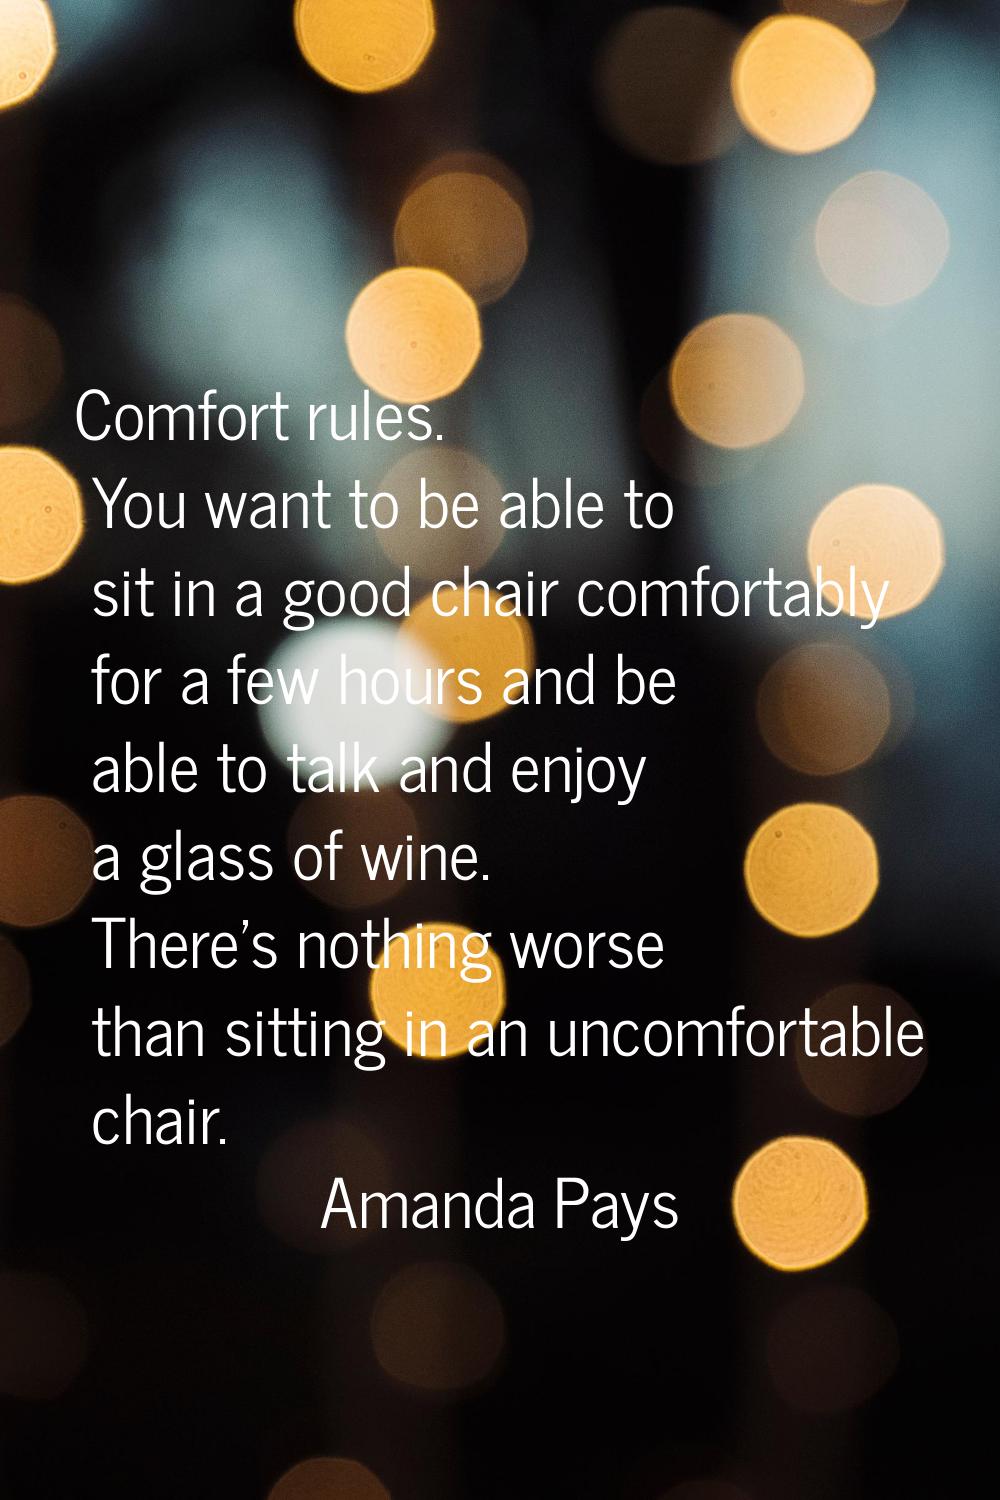 Comfort rules. You want to be able to sit in a good chair comfortably for a few hours and be able t